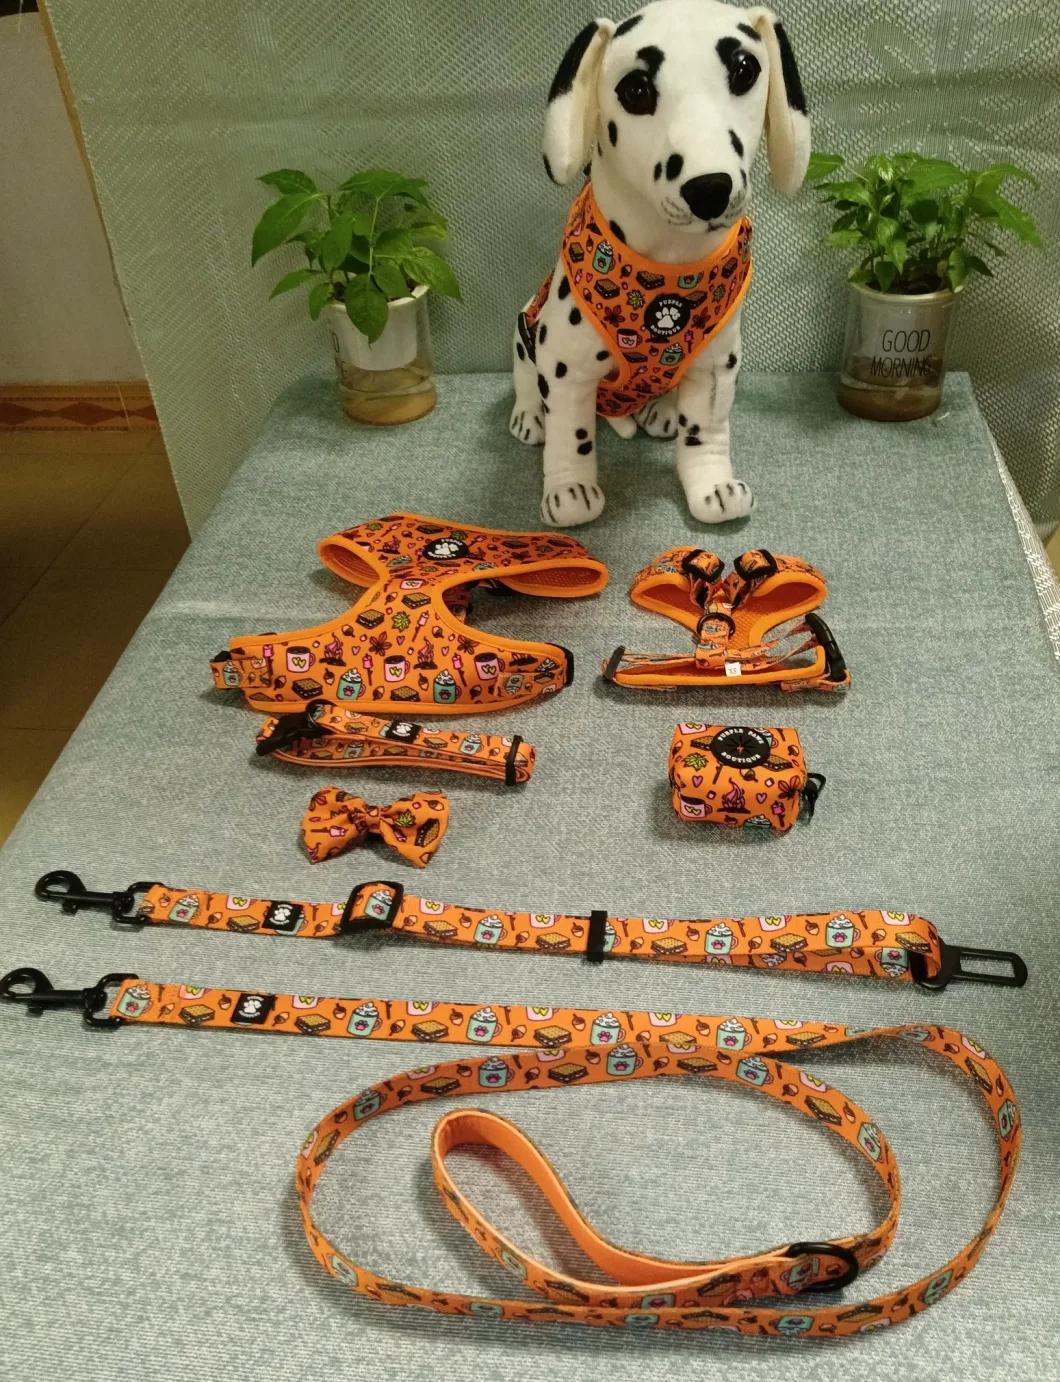 Customized Puppy Harness, Embroidered Dog Harness, Customizable Material Puppy Supplies, Dog Harness Set with Custom Logo and Pattern